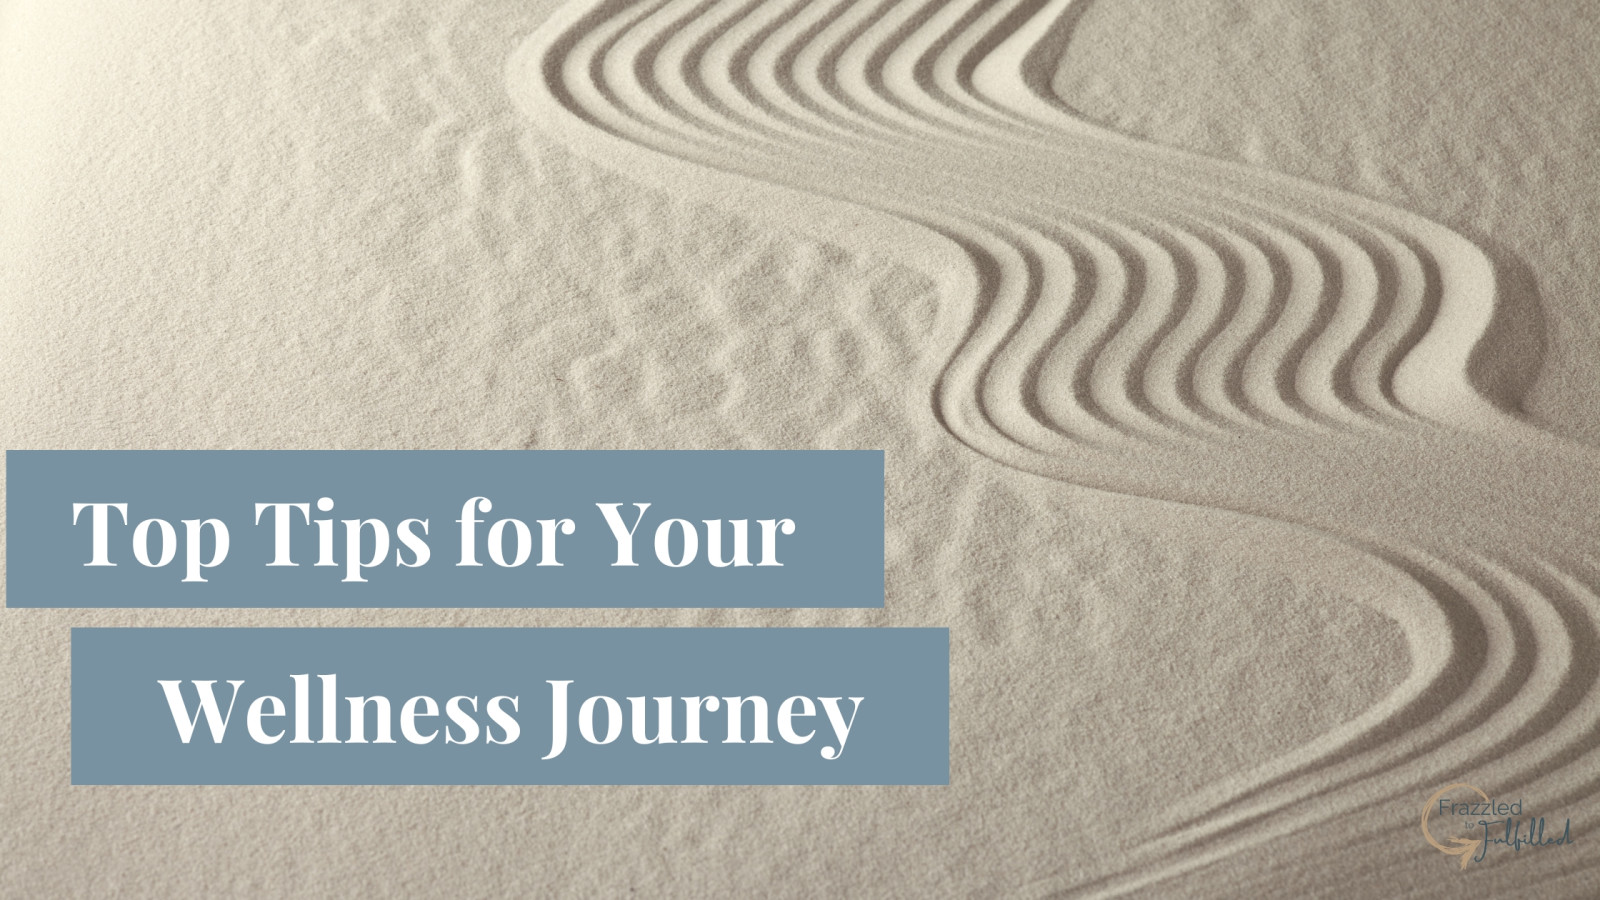 Top Tips for Your Wellness Journey